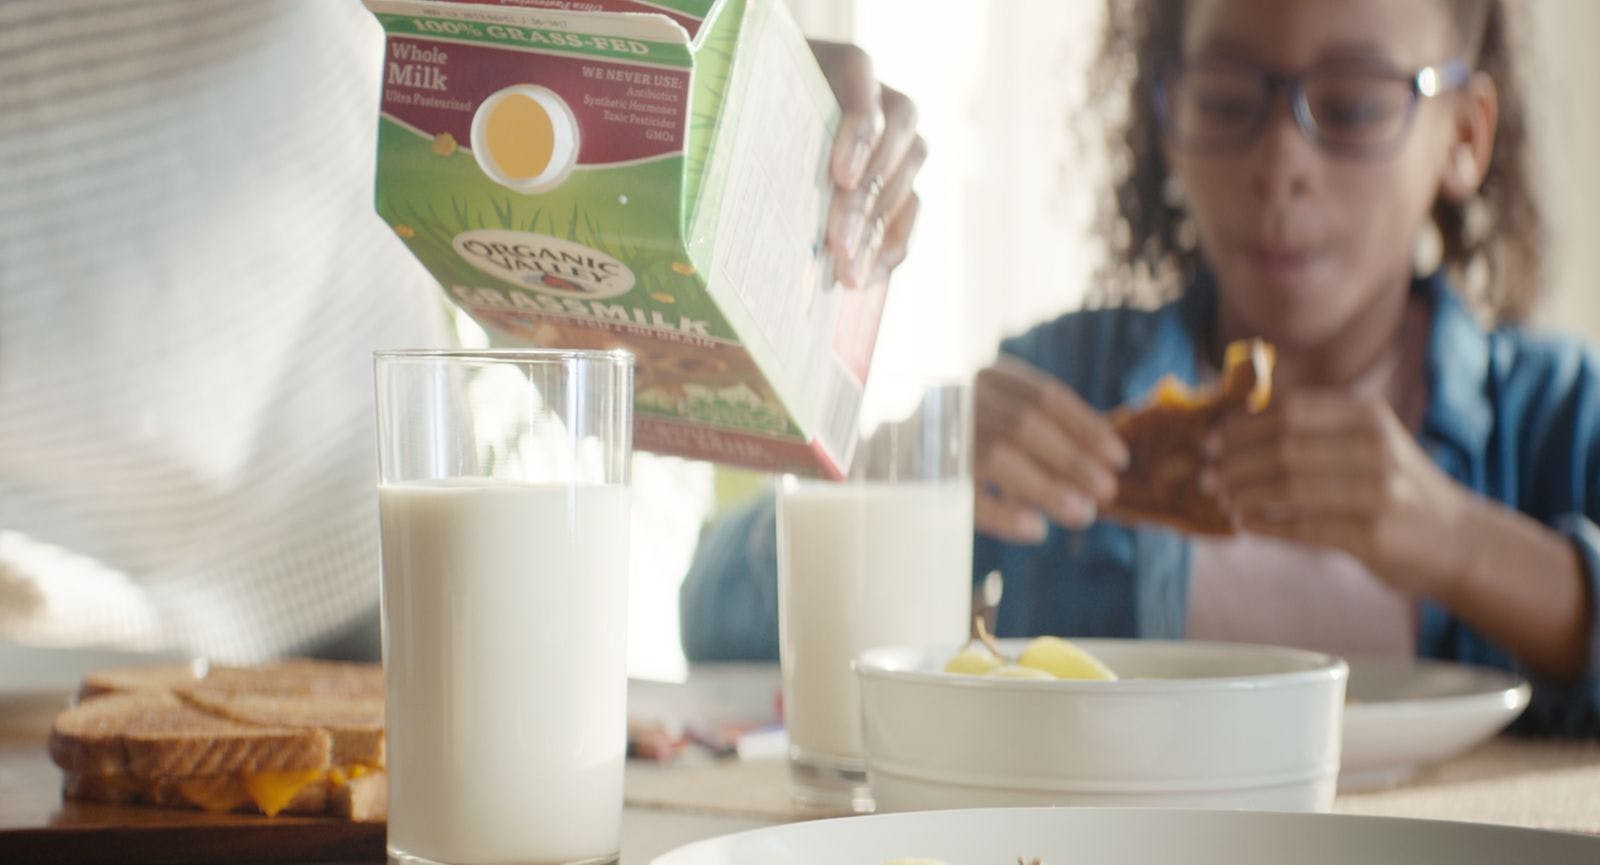 Grassmilk organic milk is poured into glasses on the kitchen table.